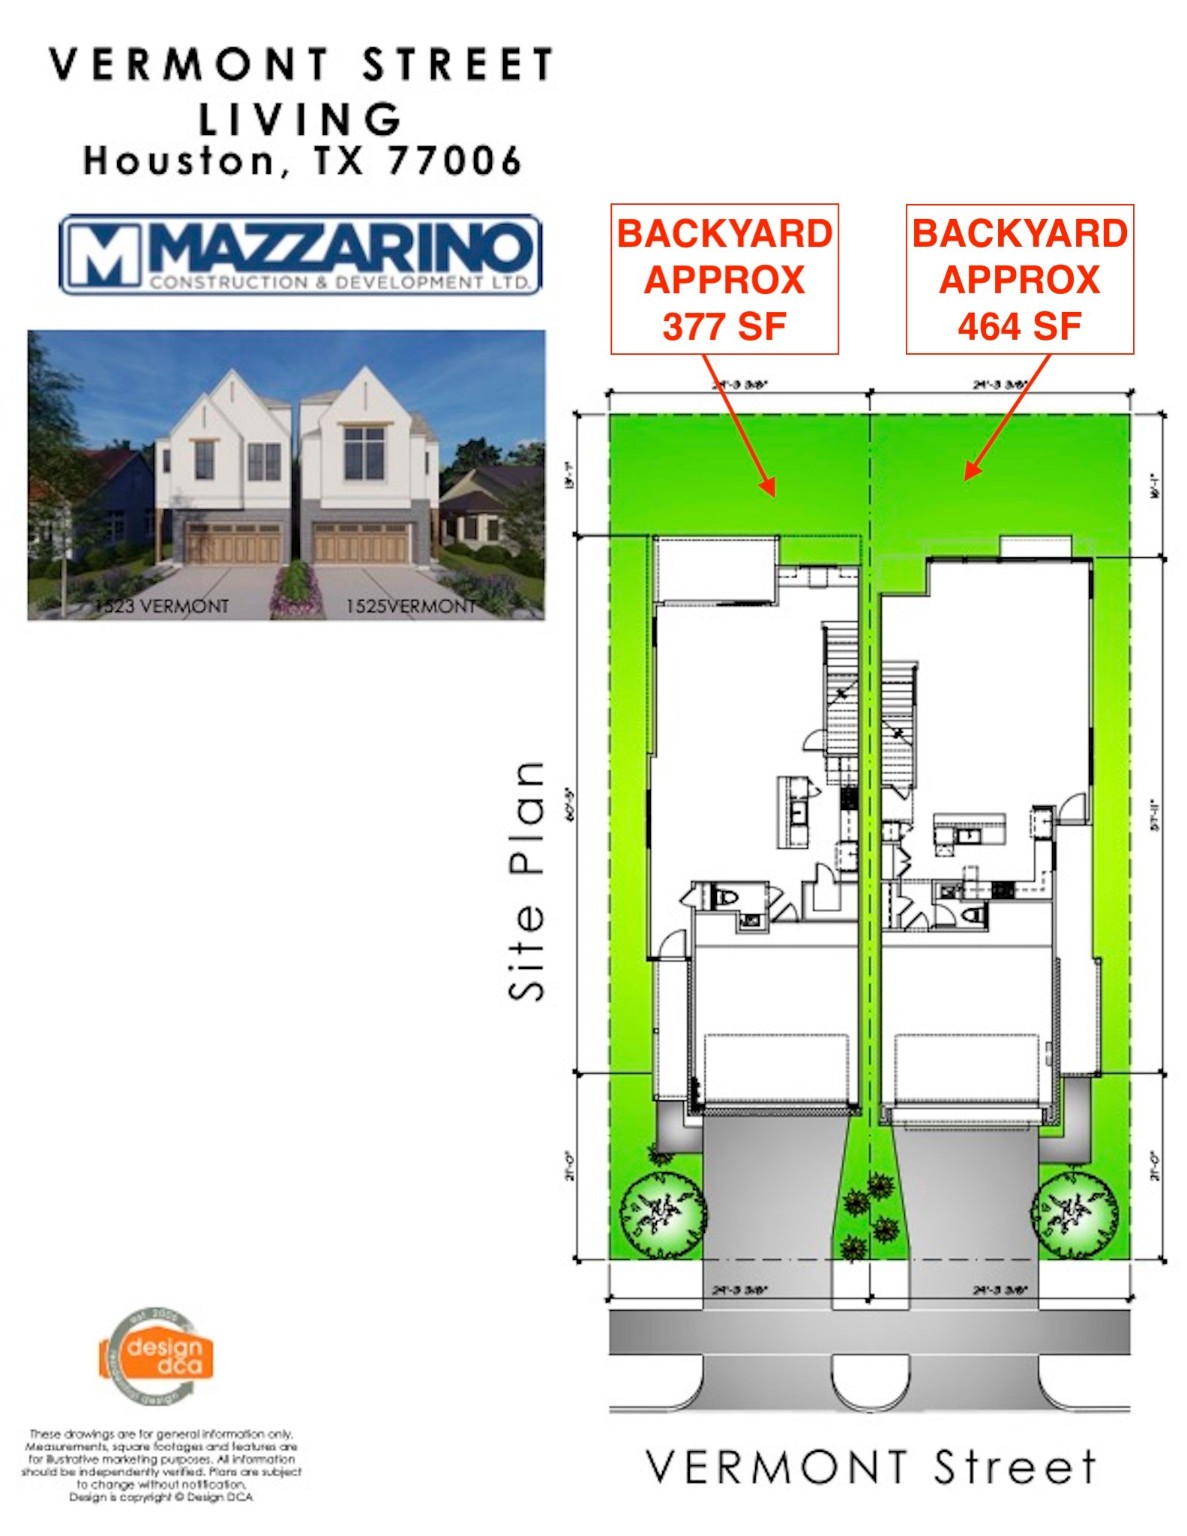 Please be aware that these plans are the property of the architect/builder designer that designed them not DUX Realty, Mazzarino Construction or 1523 VERMONT LLC and are protected from reproduction and sharing under copyright law. These drawing are for general information only. Measurements, square footages and features are for illustrative marketing purposes. All information should be independently verified. Plans are subject to change without notification.